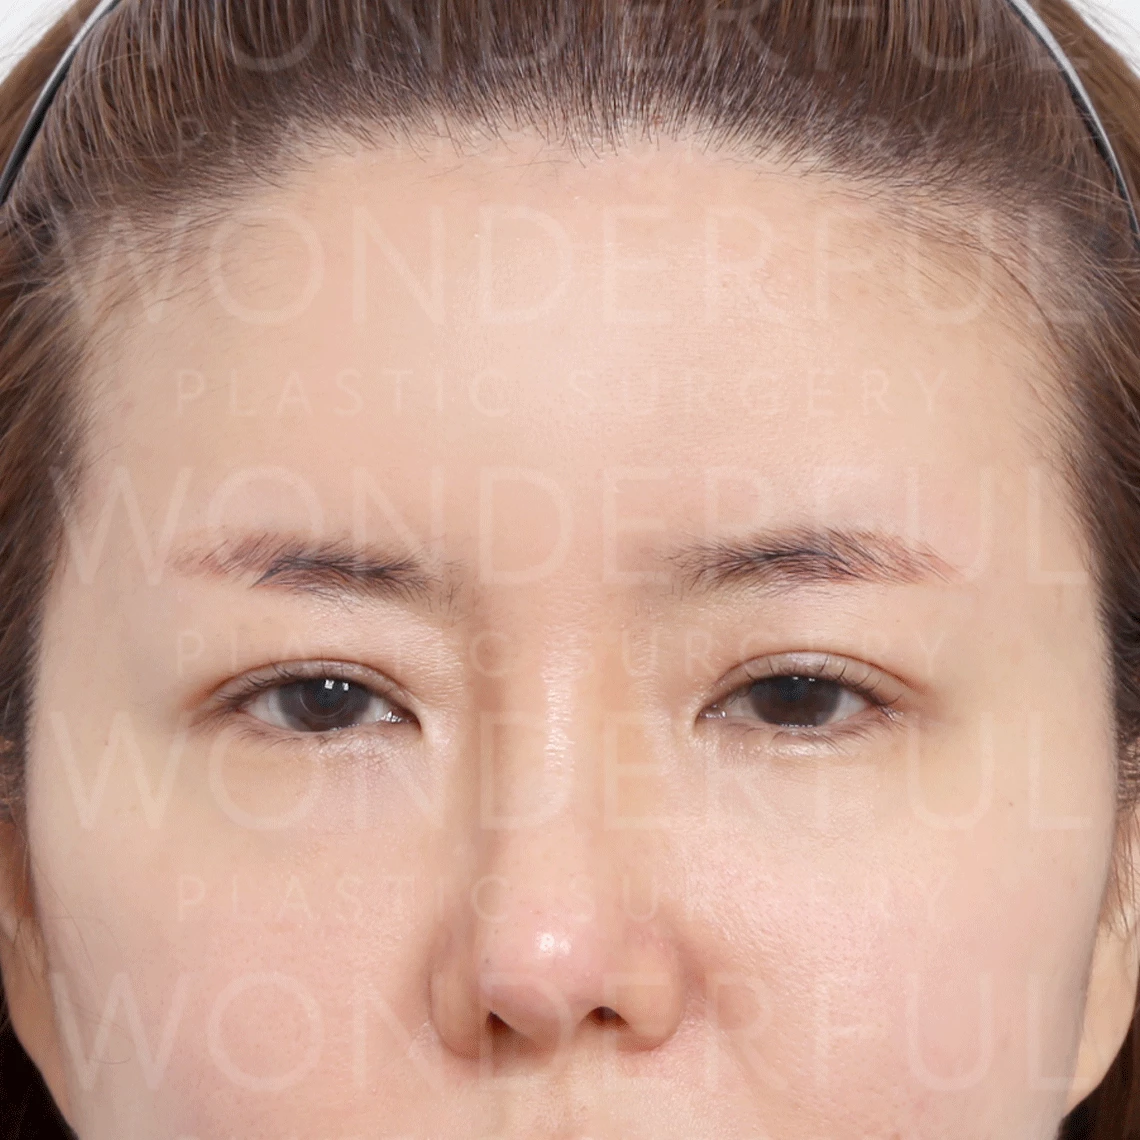 wonderful-plastic-surgery-hospital-korea-endoscopic-fore-head-lift-surgery-before-after-results-before-2